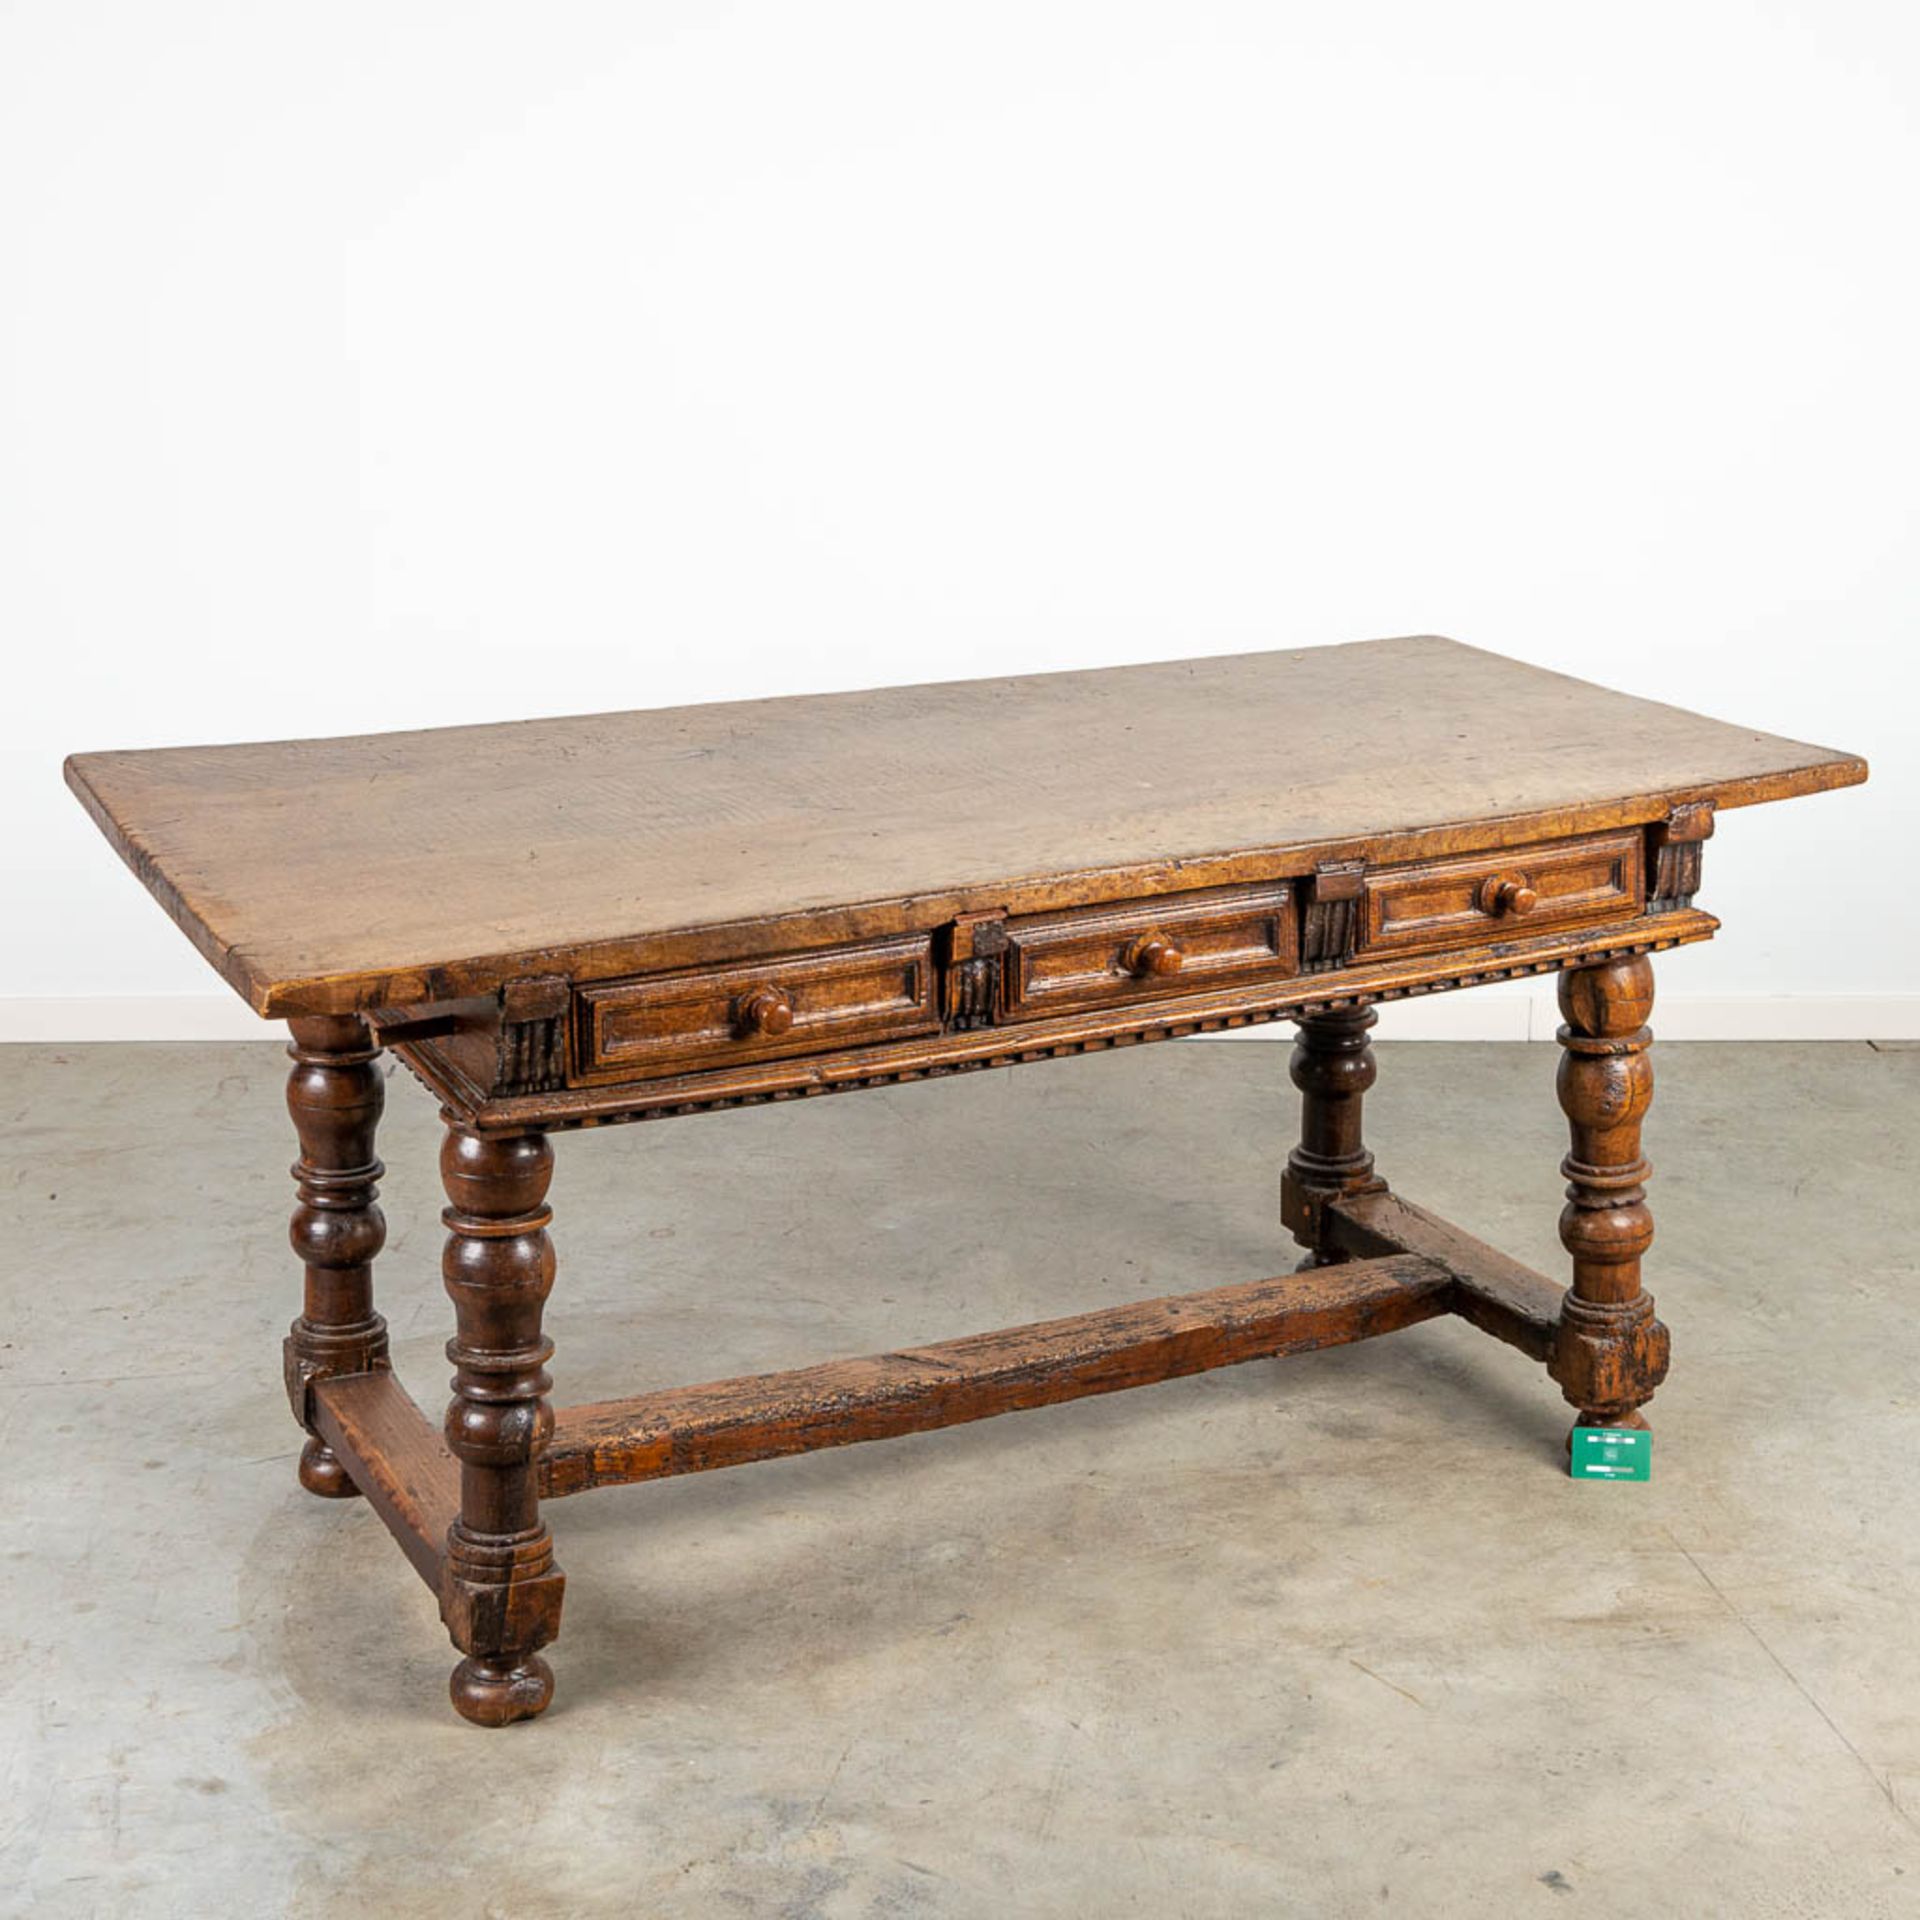 An antique table with 6 drawers, made during the 17th century. - Image 2 of 12